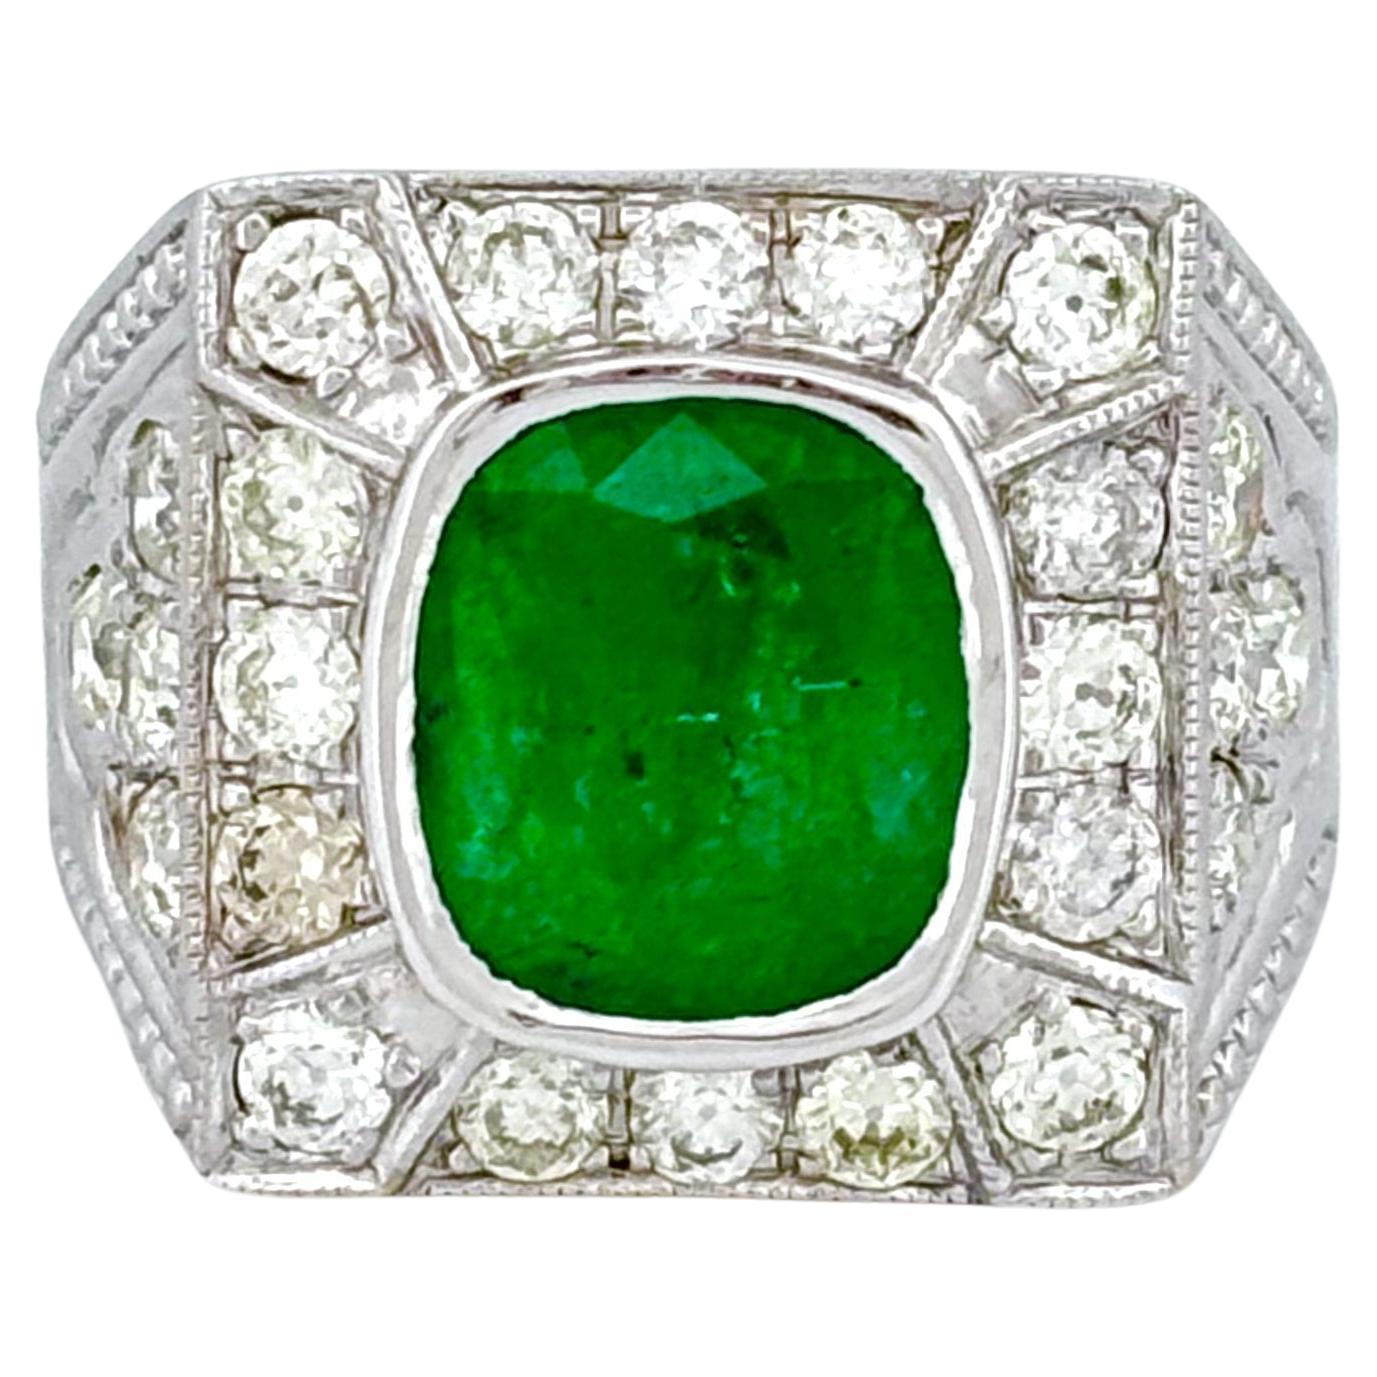 2.66 ct Zambian Emerald Art Deco Ring with Old Cut Diamonds in 18K Gold